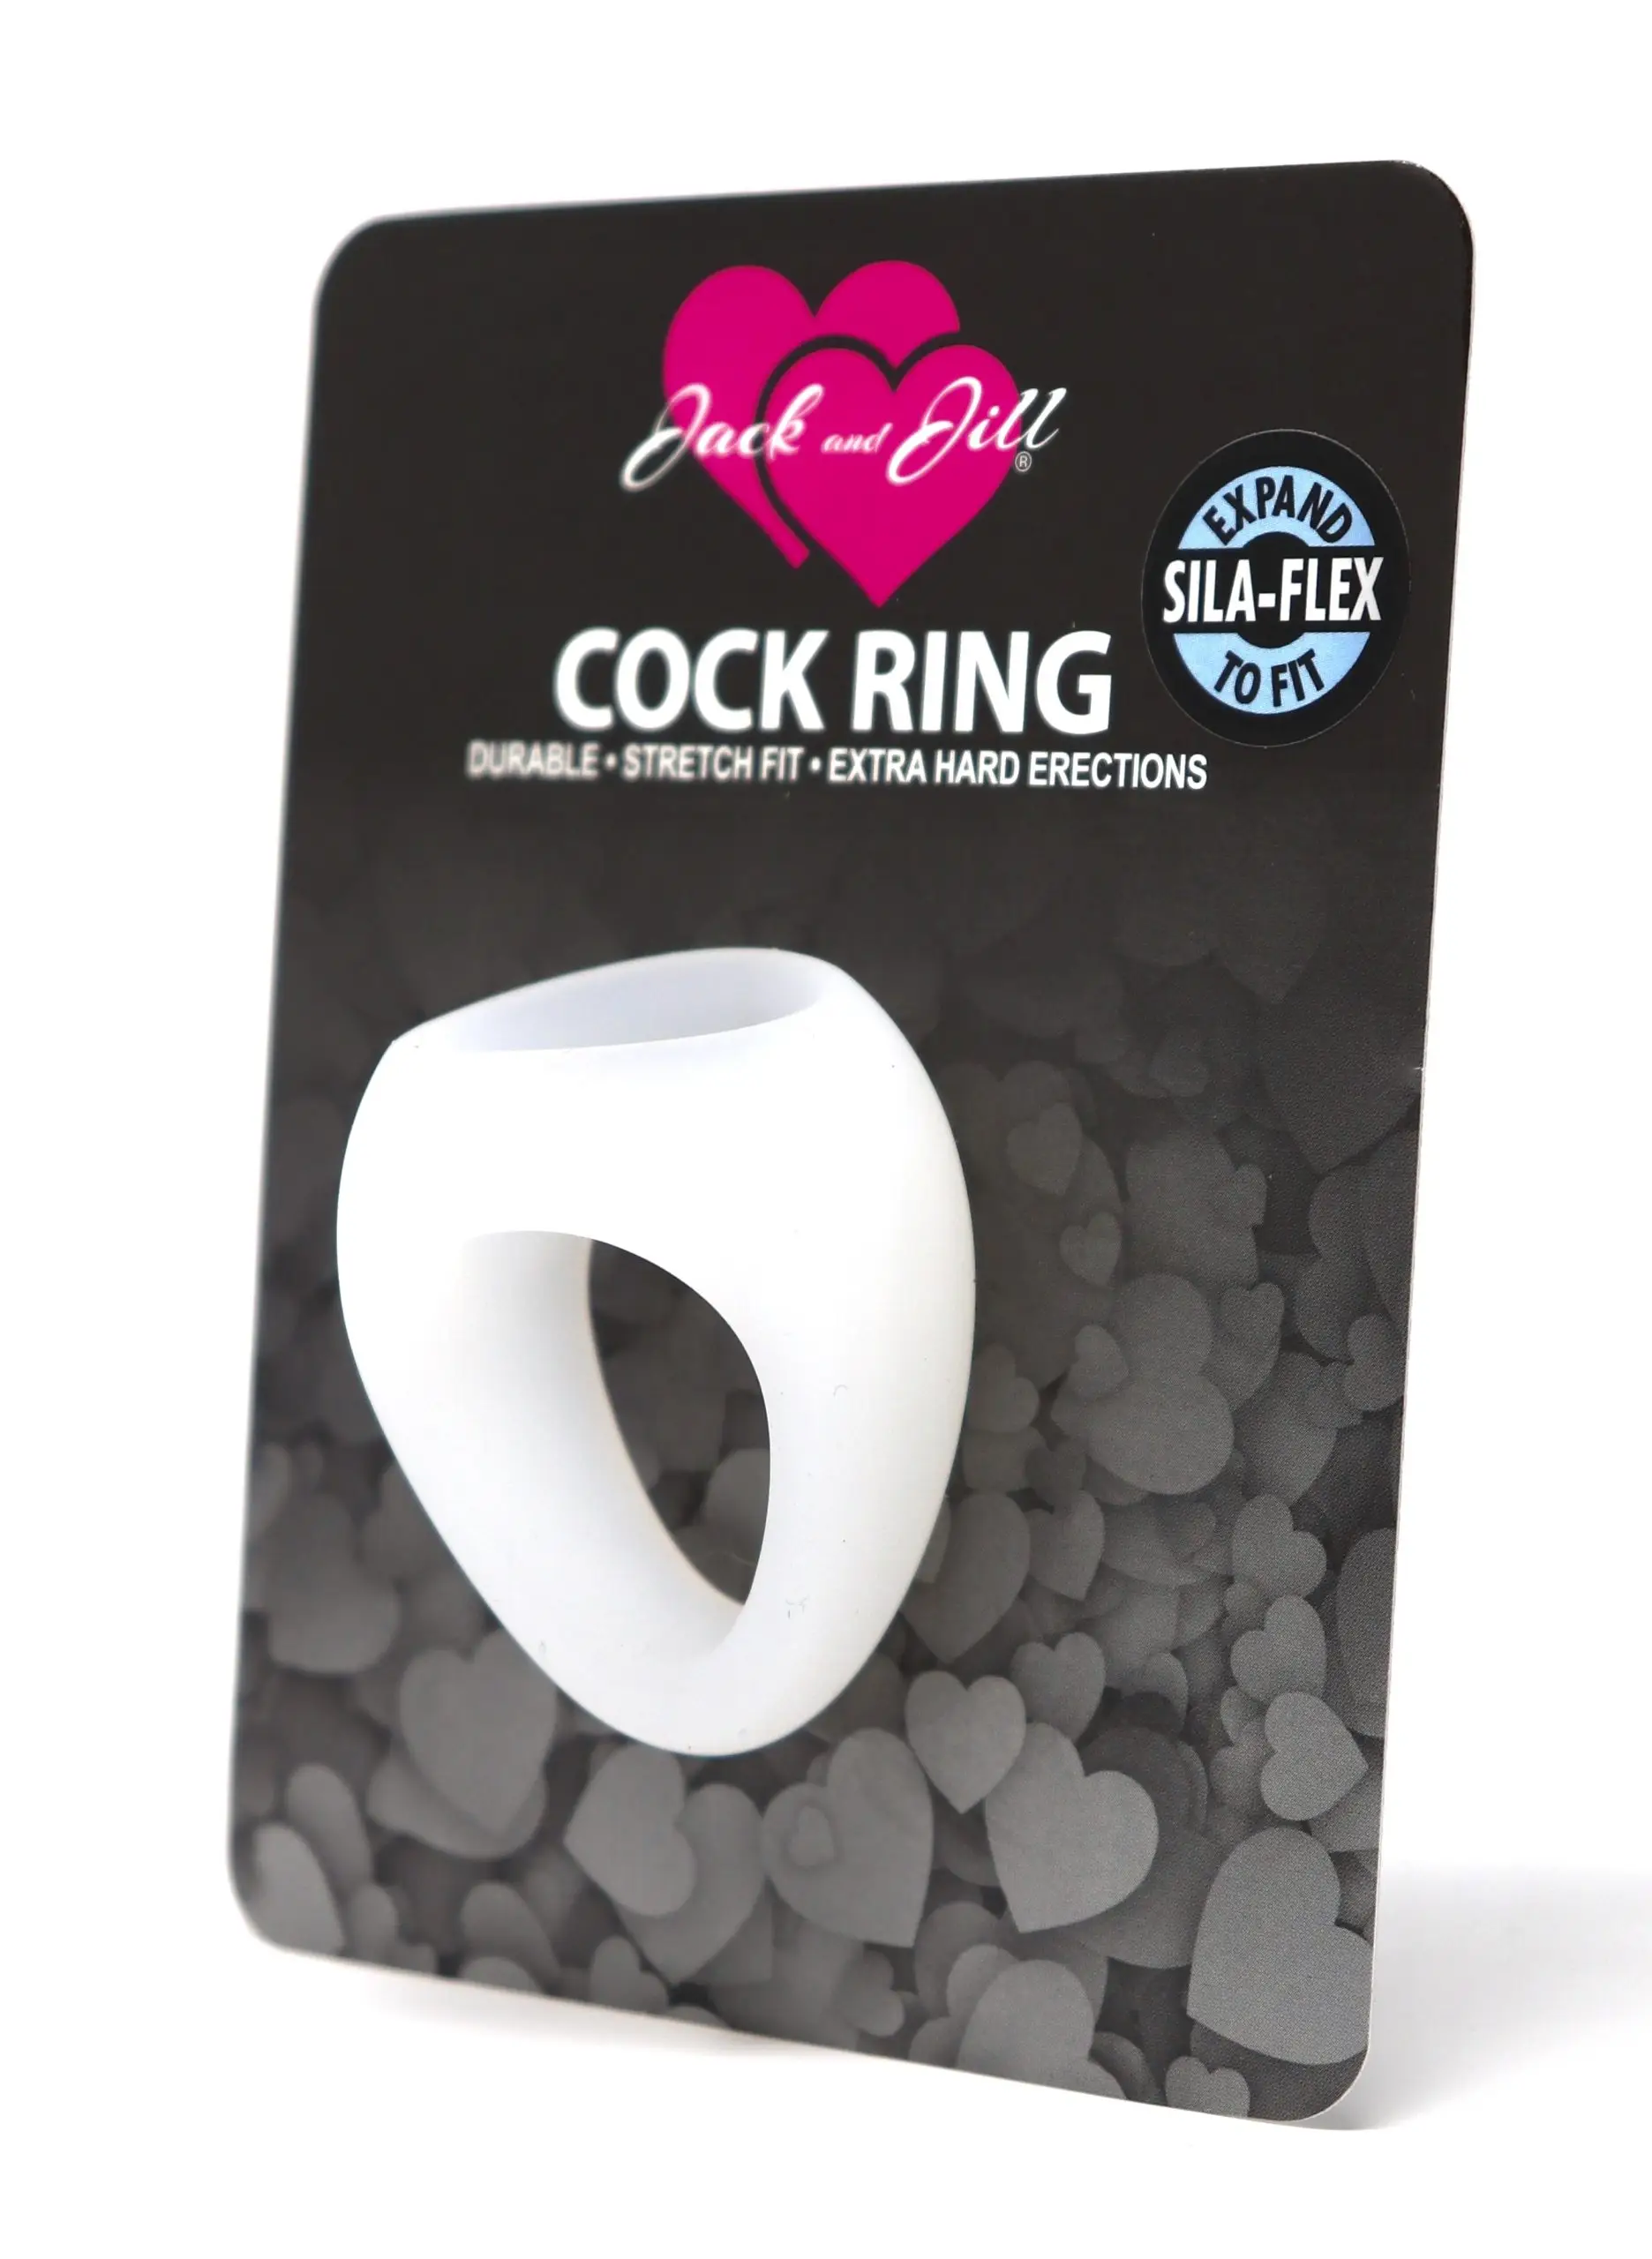 Jack and Jill Silicone Stretcher Translucent cock ring